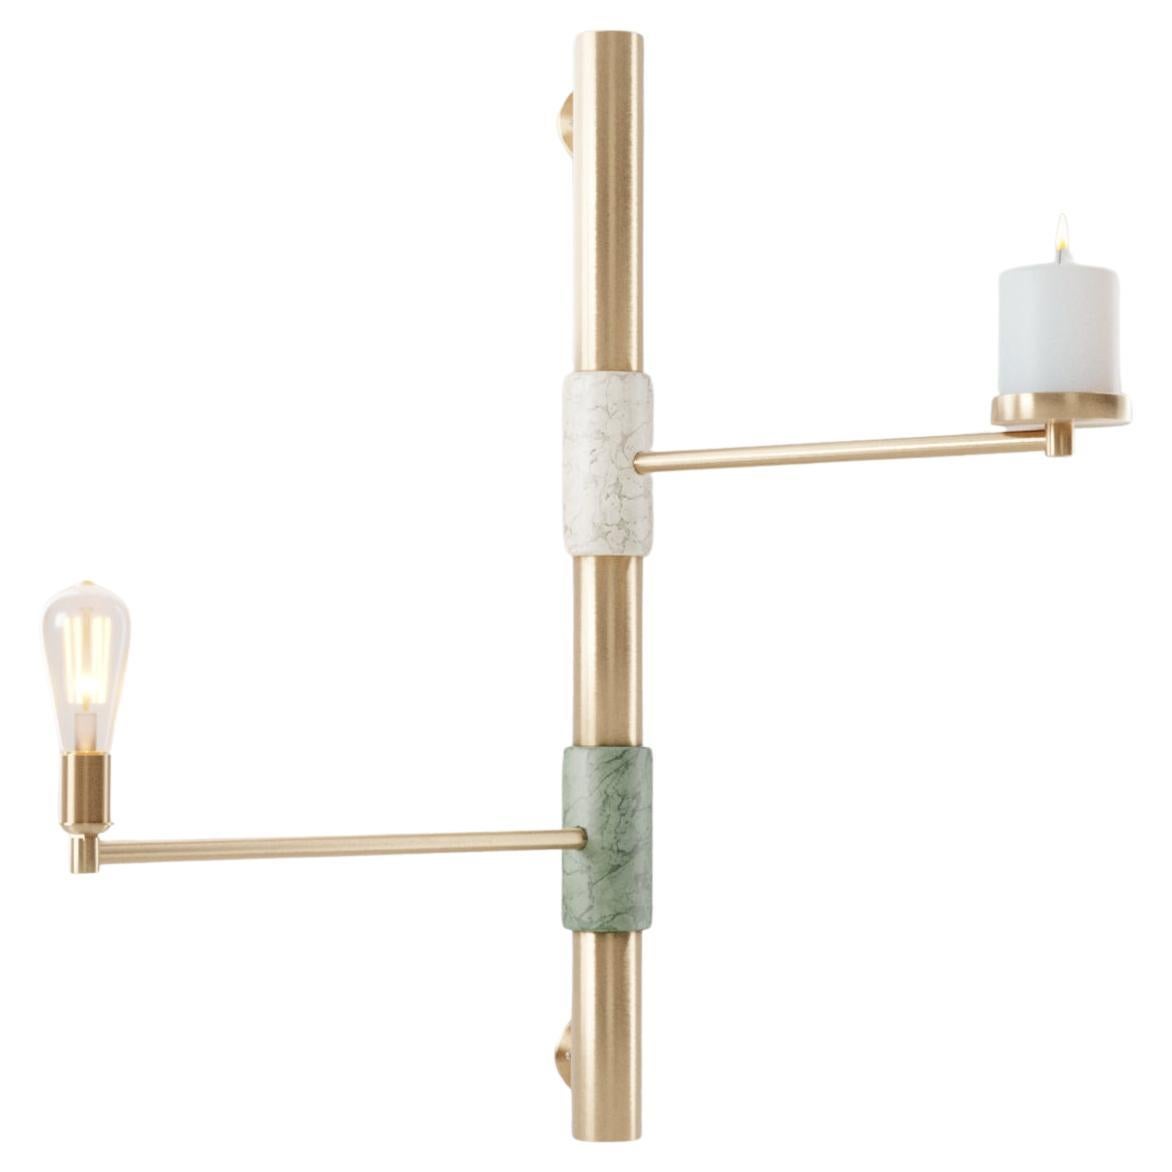 A.I.C Contemporary Marine Breynaert Wall Sconce Lamp Brass Marble